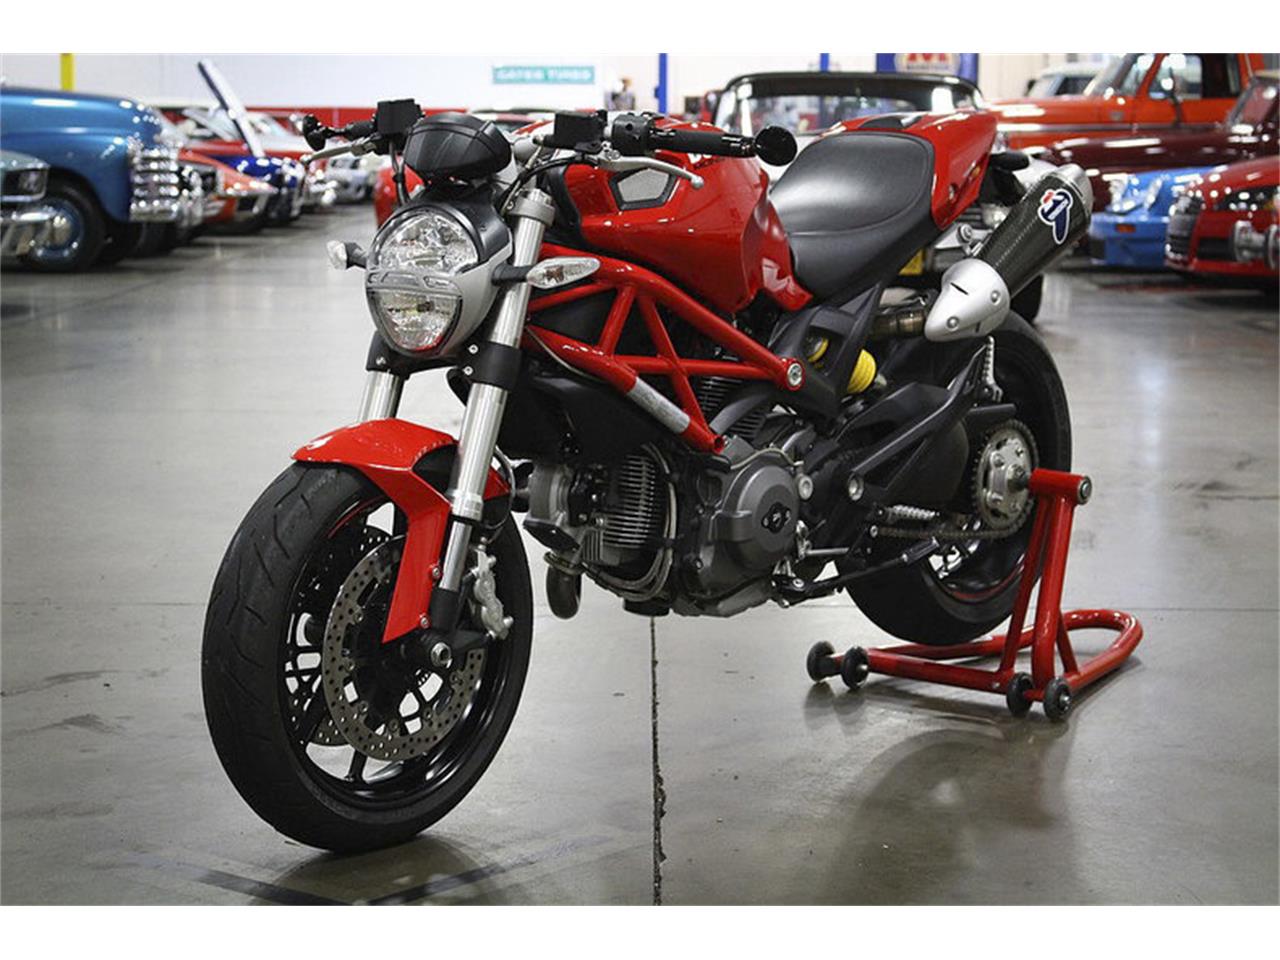 2012 DUCATI MONSTER 659 ABS - JBMD5093782 - JUST BIKES